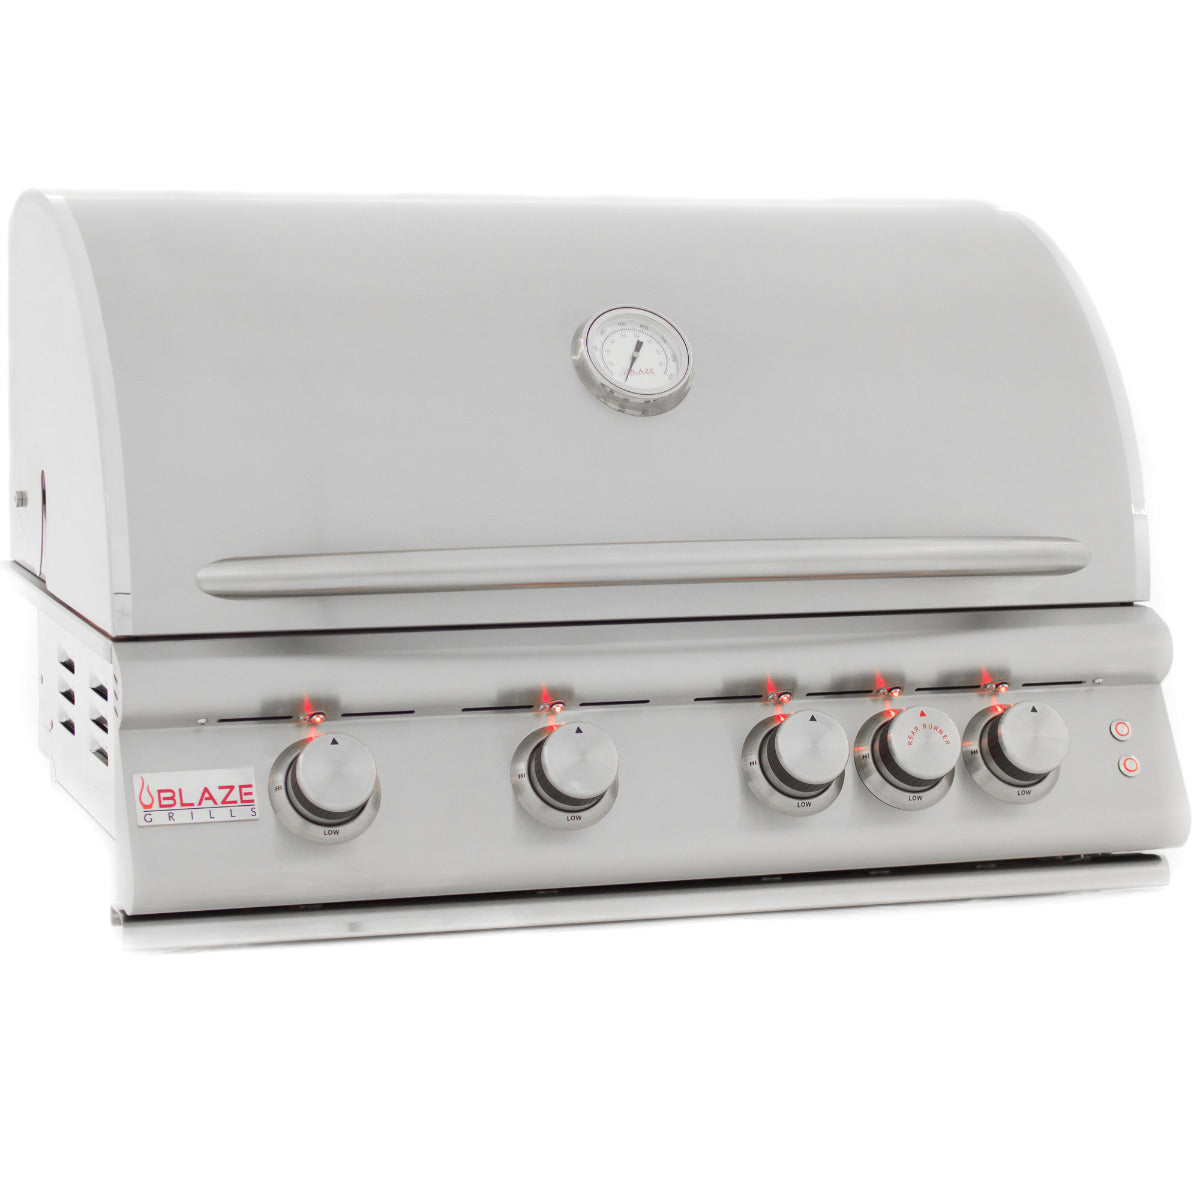 Blaze Premium 32-Inch 4-Burner LTE Gas Grill with Rear Burner and Built-in Lighting System